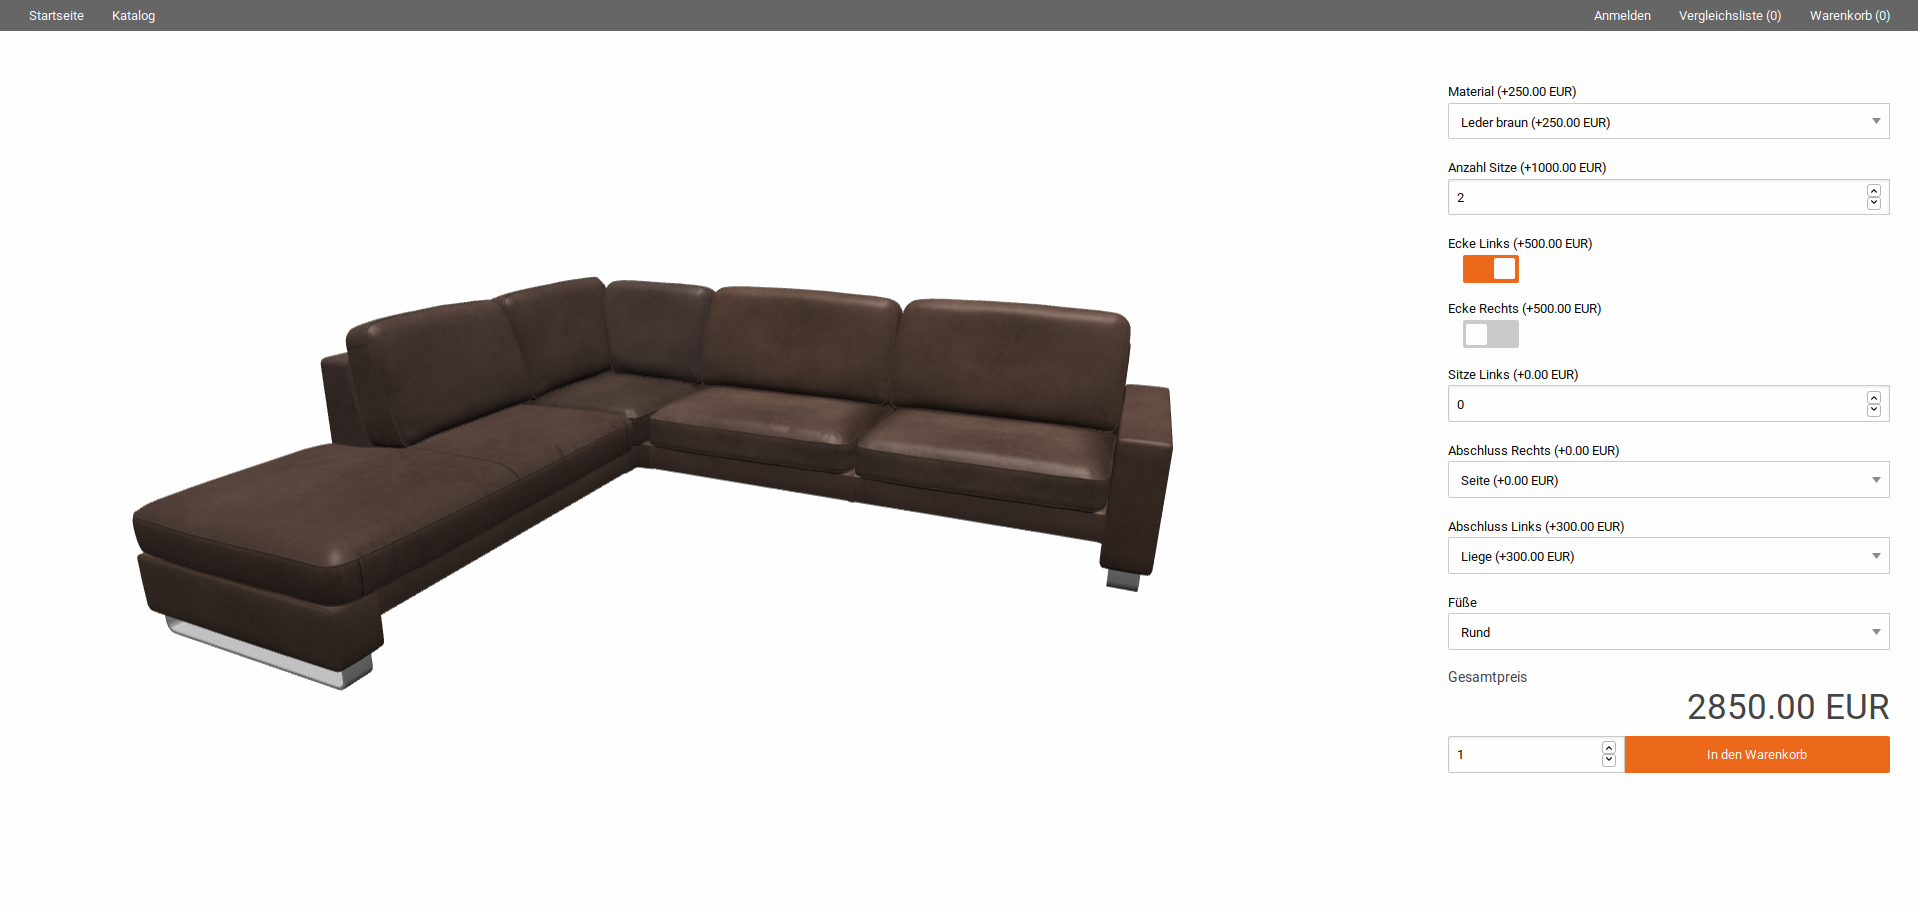 Implementation of the product configuration for the Lipari sofa considering element overview III